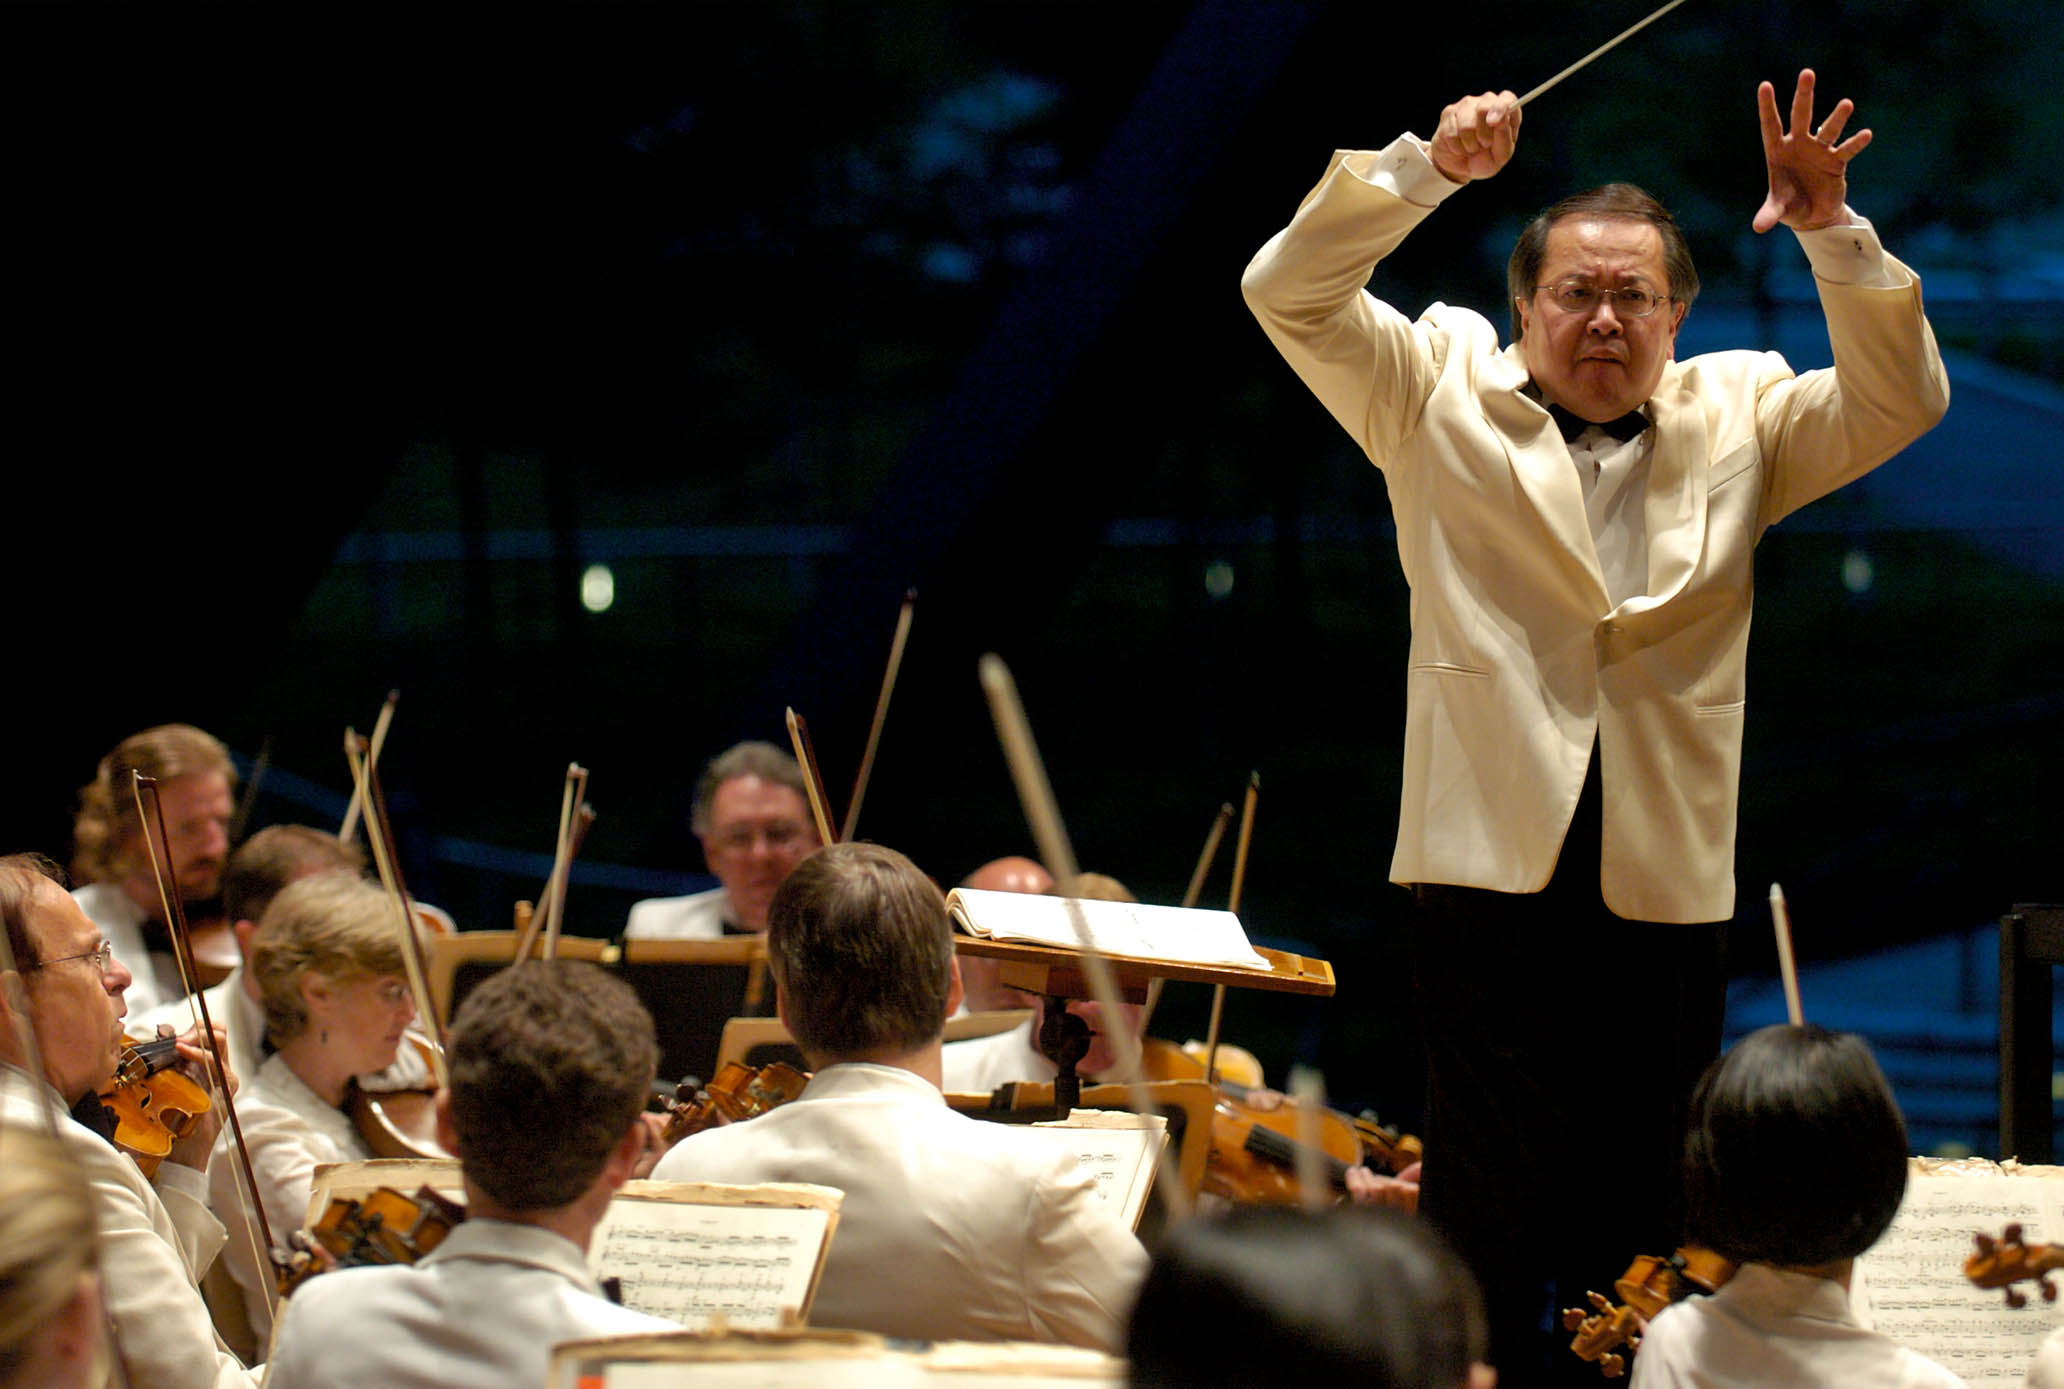 His hands held high, Jahja Ling conducts the Orchestra at Blossom. All are dressed in white jackets: formal dress for Blossom. 